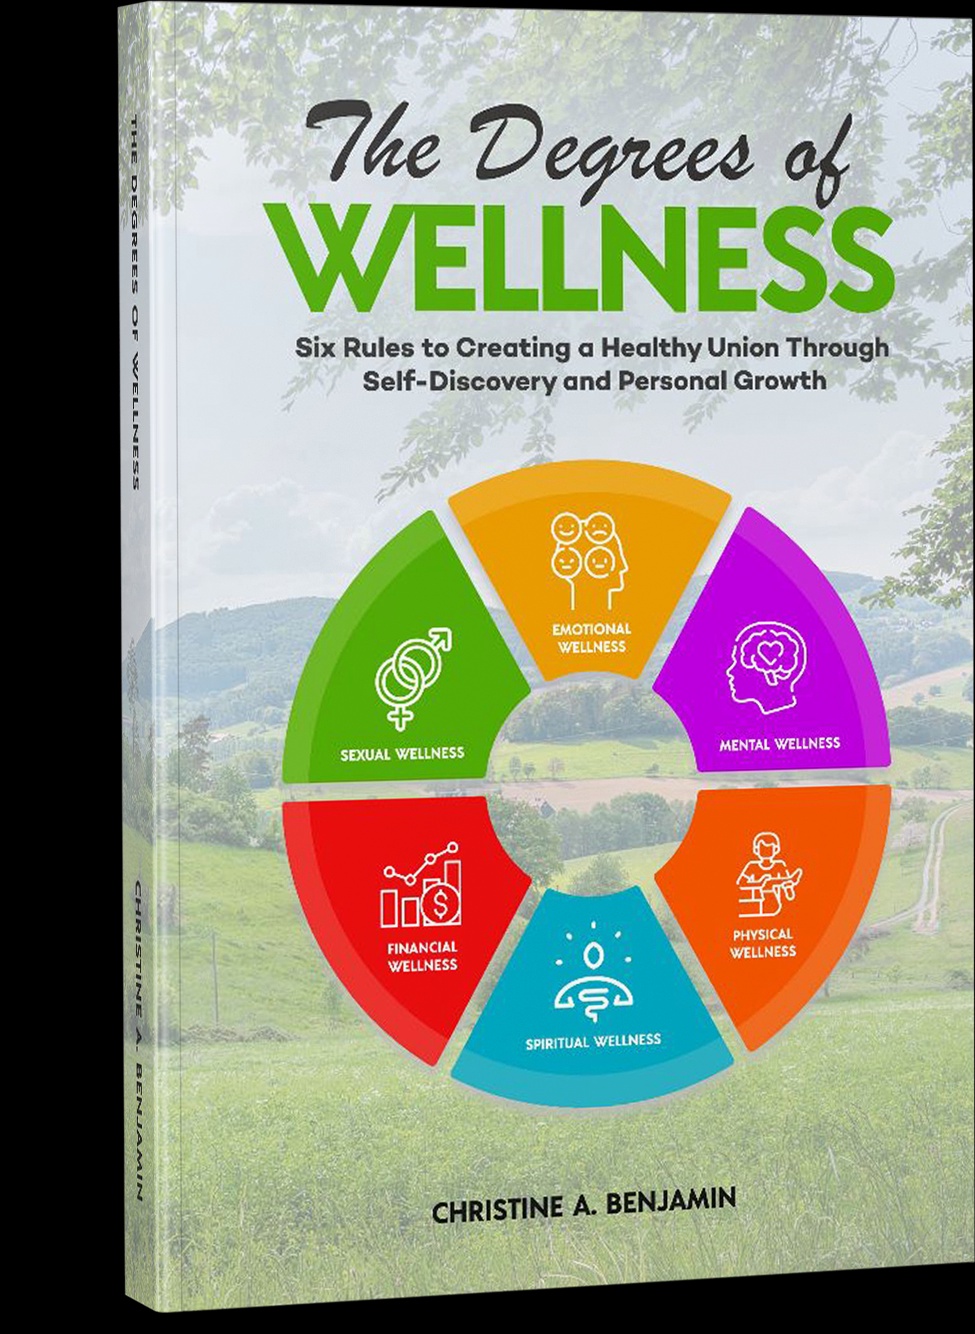 The Degrees of Wellness Book Building Healthy Relationships Through Growth